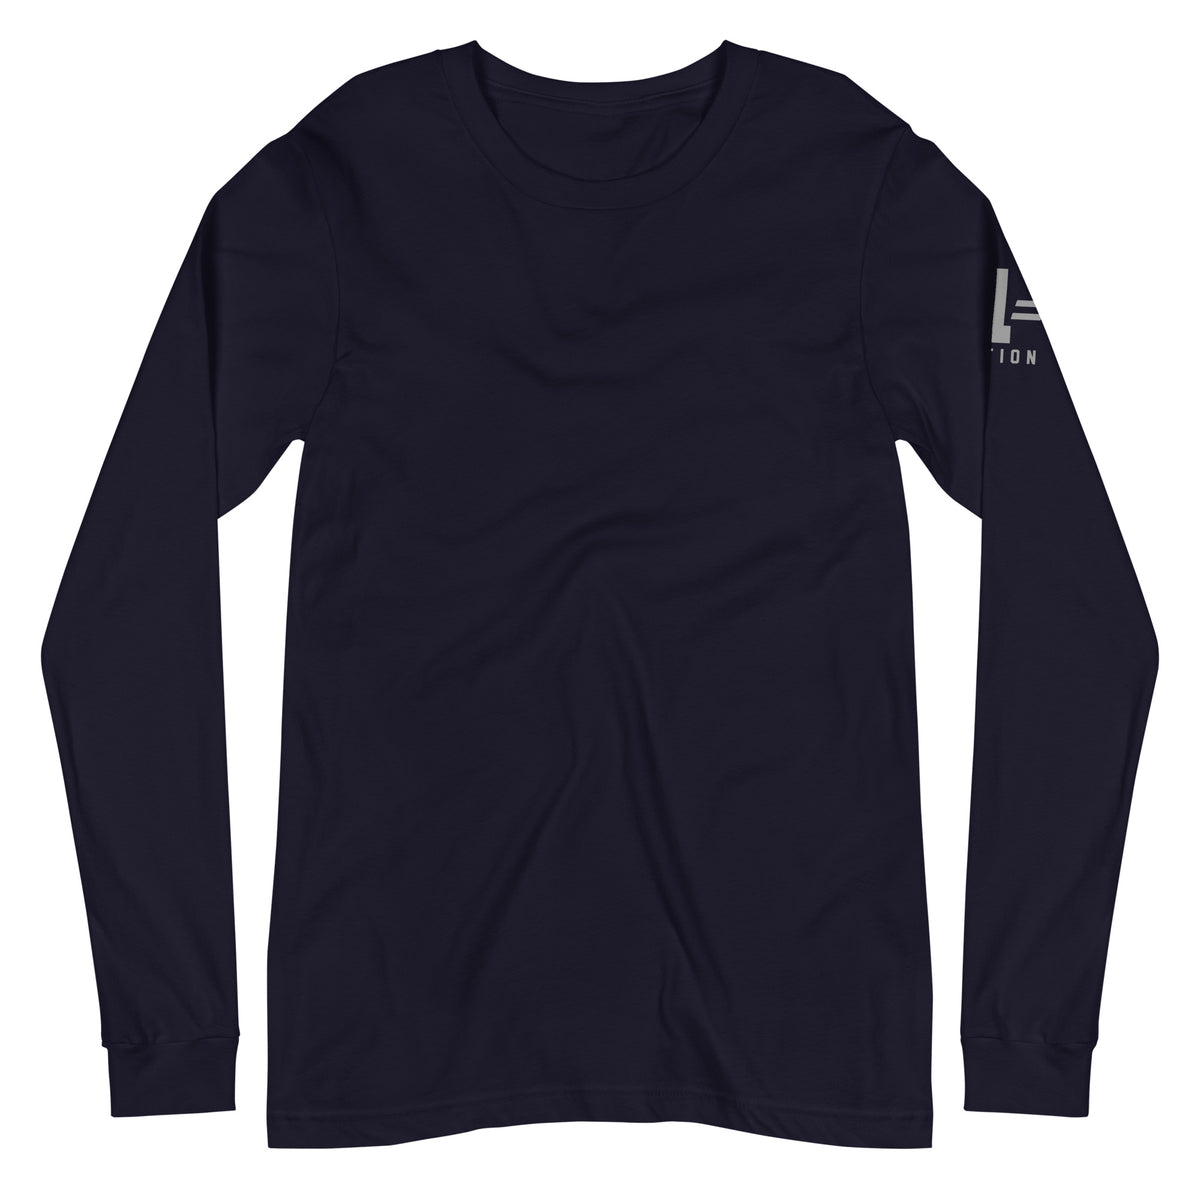 Police Fire Military: We Got Your Six Long Sleeve